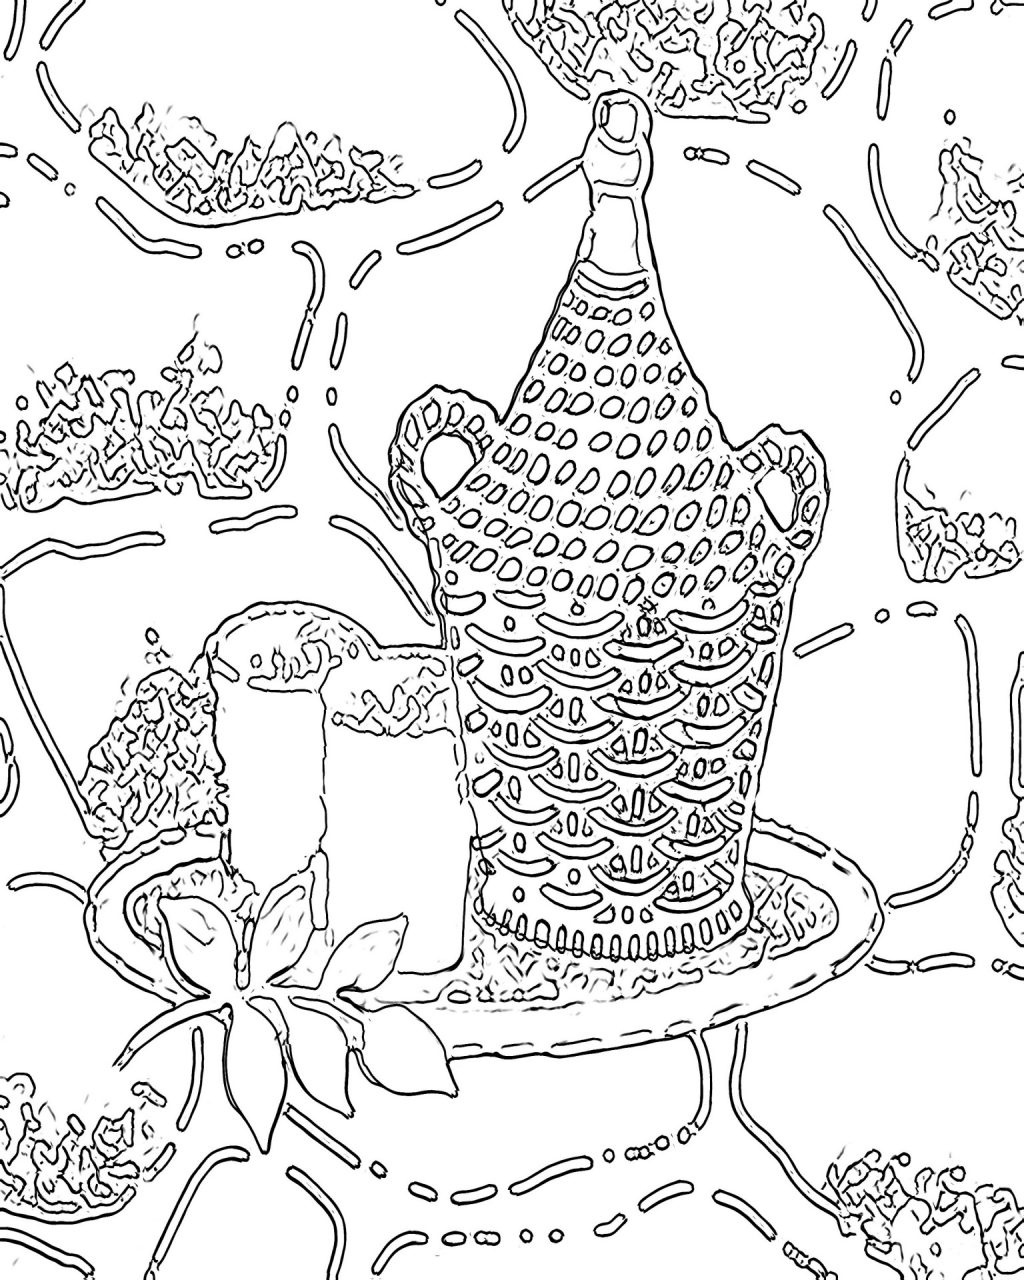 Coloring Page ~ Adult Coloring Books Nature Page Free Printable - Free Printable Nature Coloring Pages For Adults